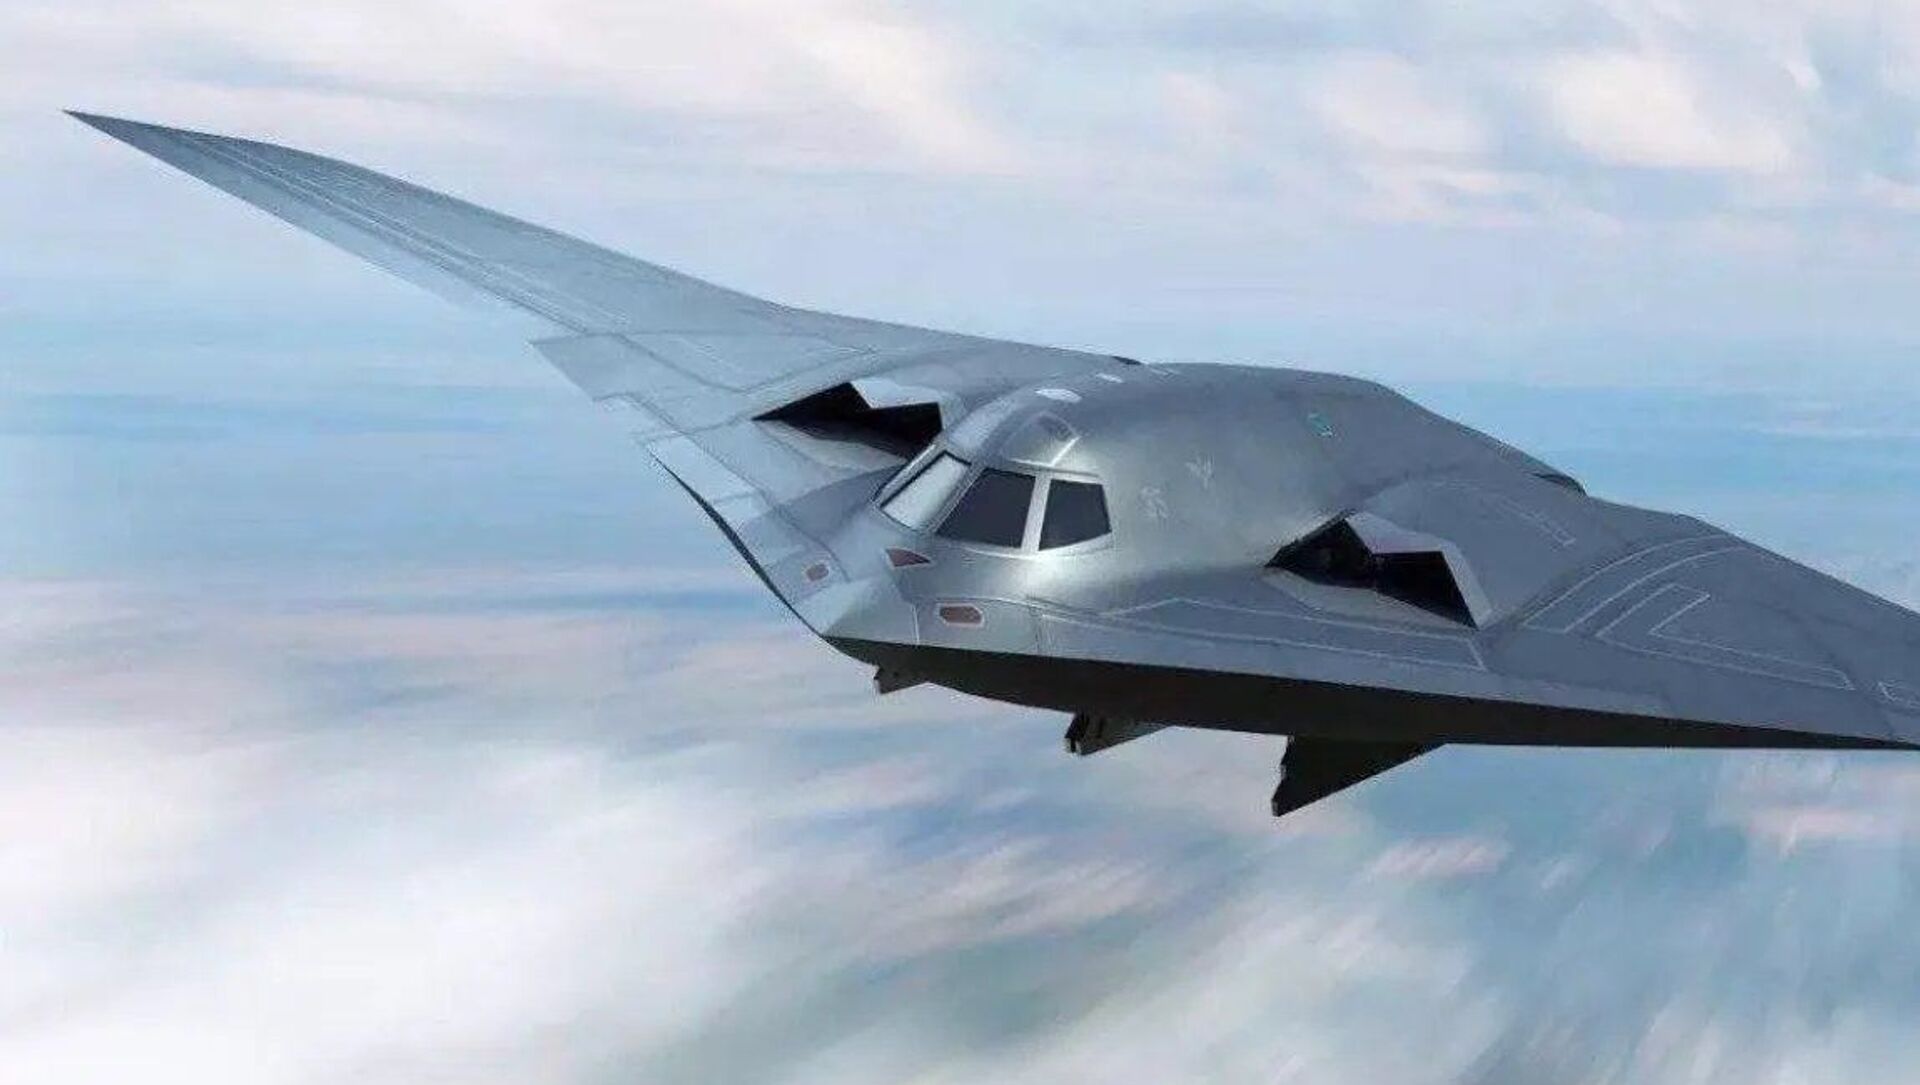 A concept art depicting China's People's Liberation Army's new-generation Xian H-20 stealth bomber - Sputnik International, 1920, 26.05.2021